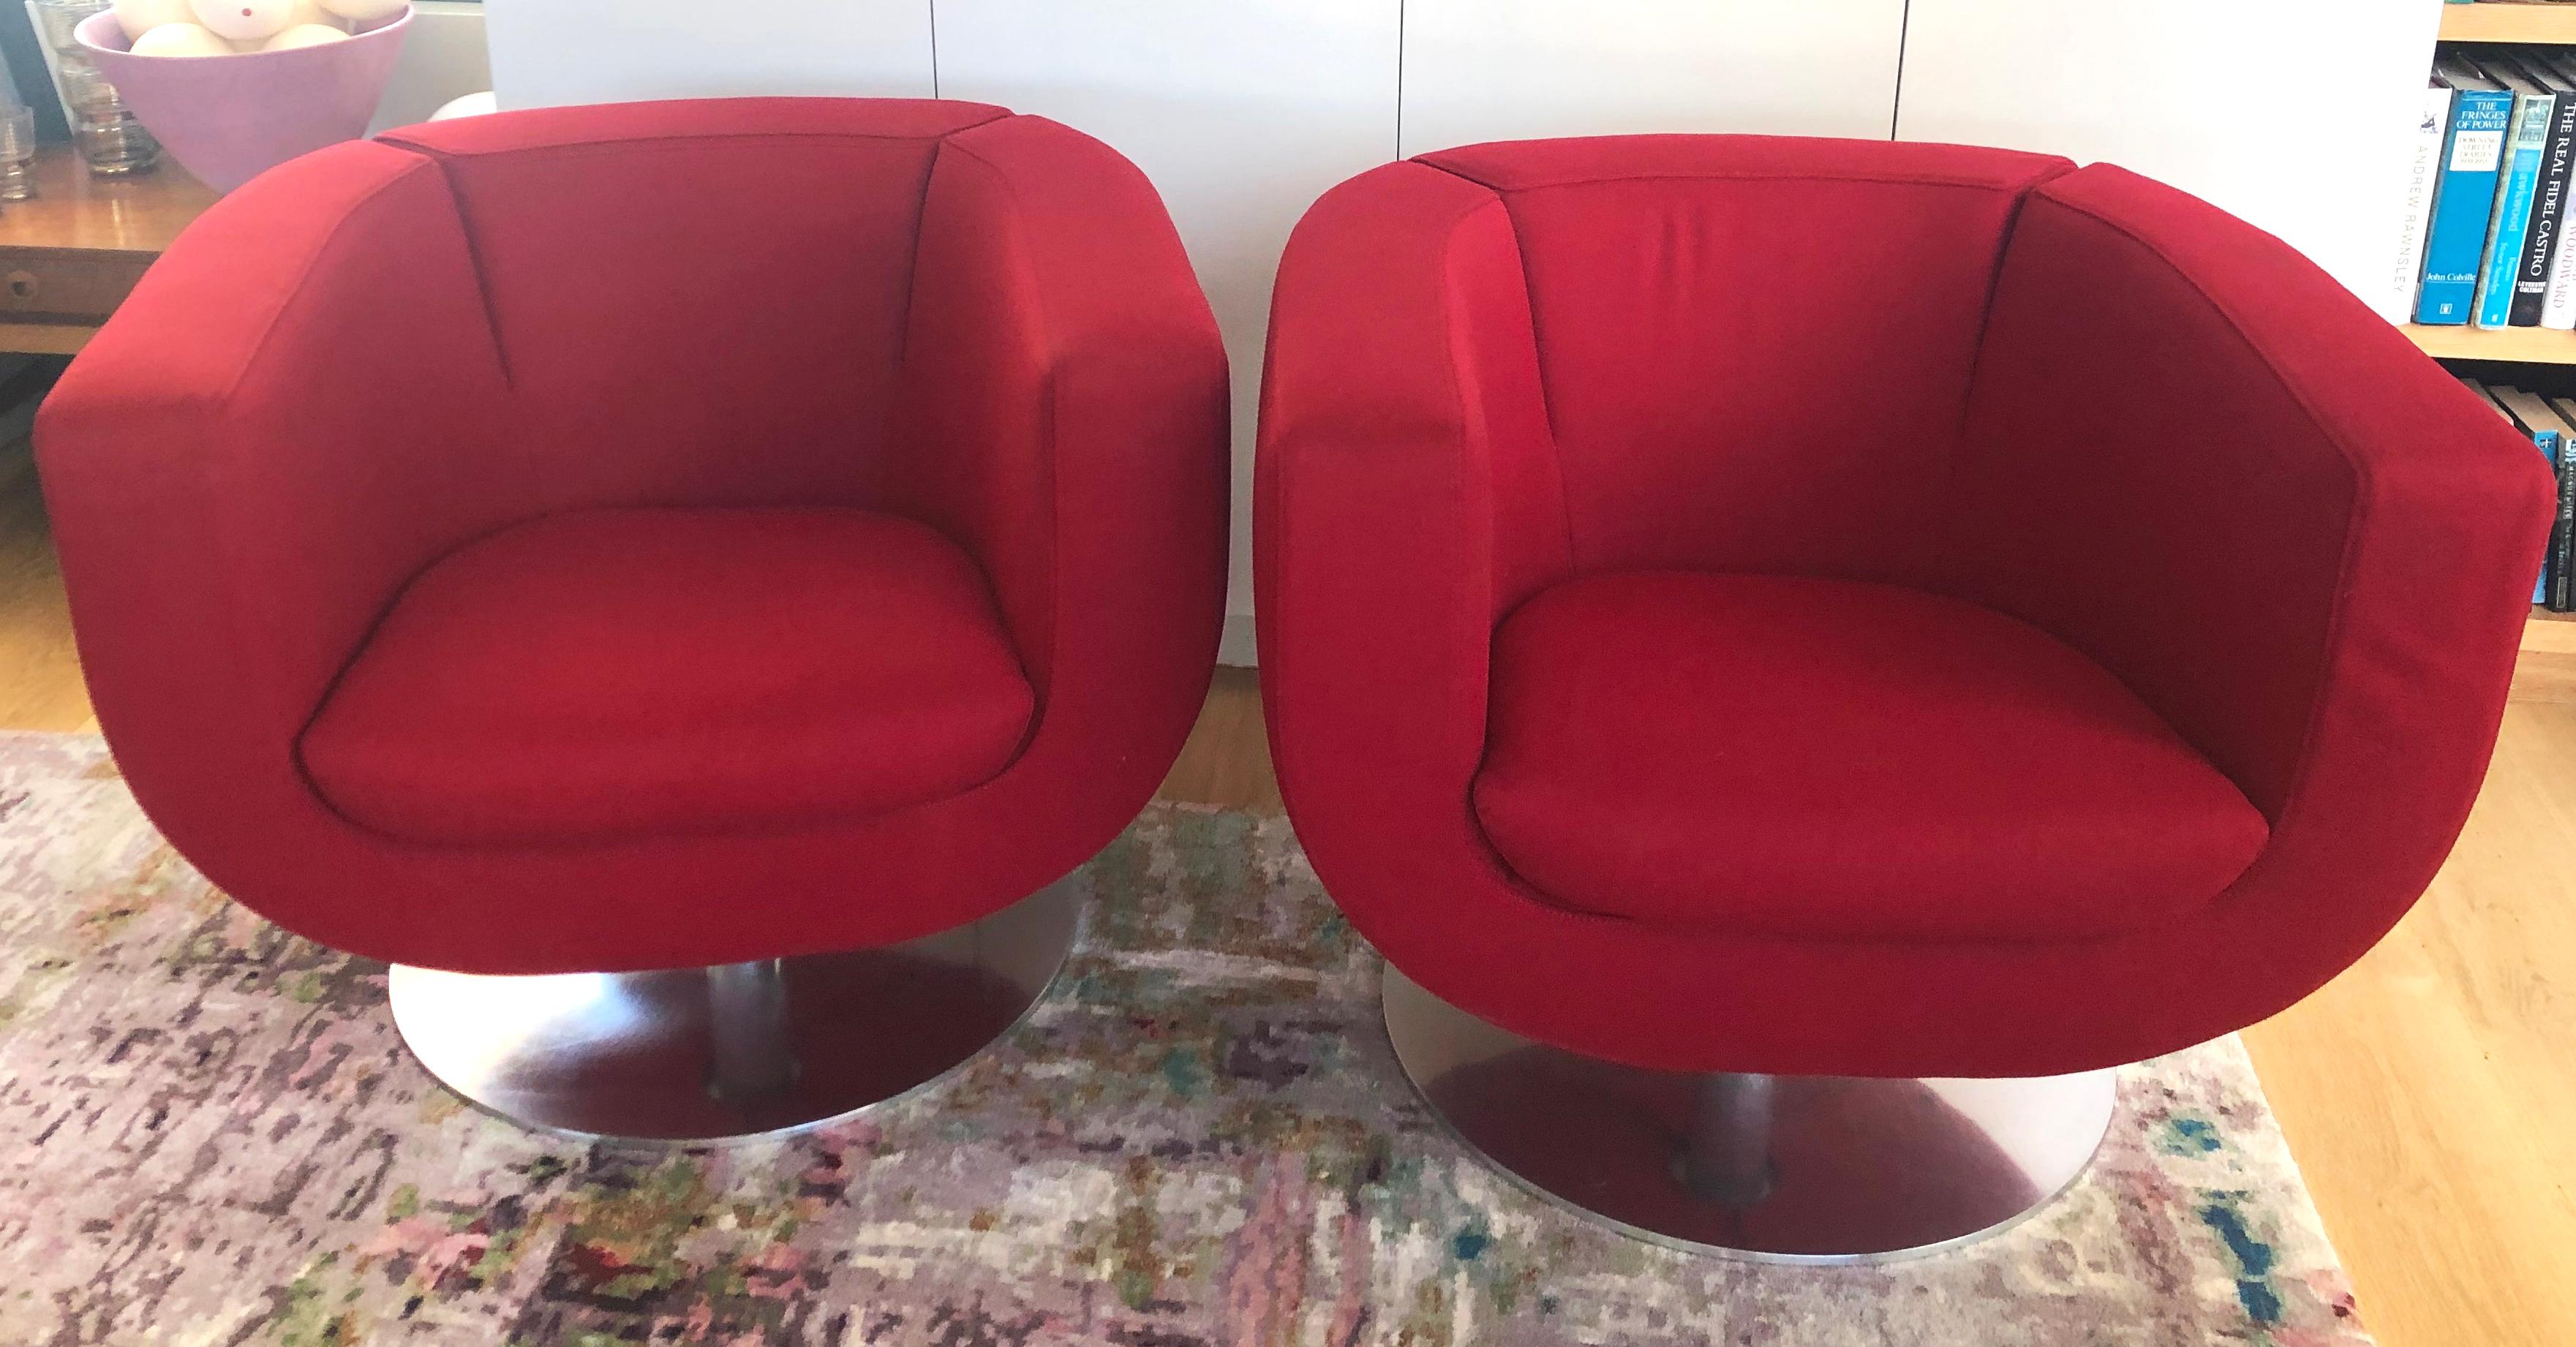 Modern Pair of Red Tulip Chairs by Jeffrey Bernett for B&B Italia Chrome Base For Sale